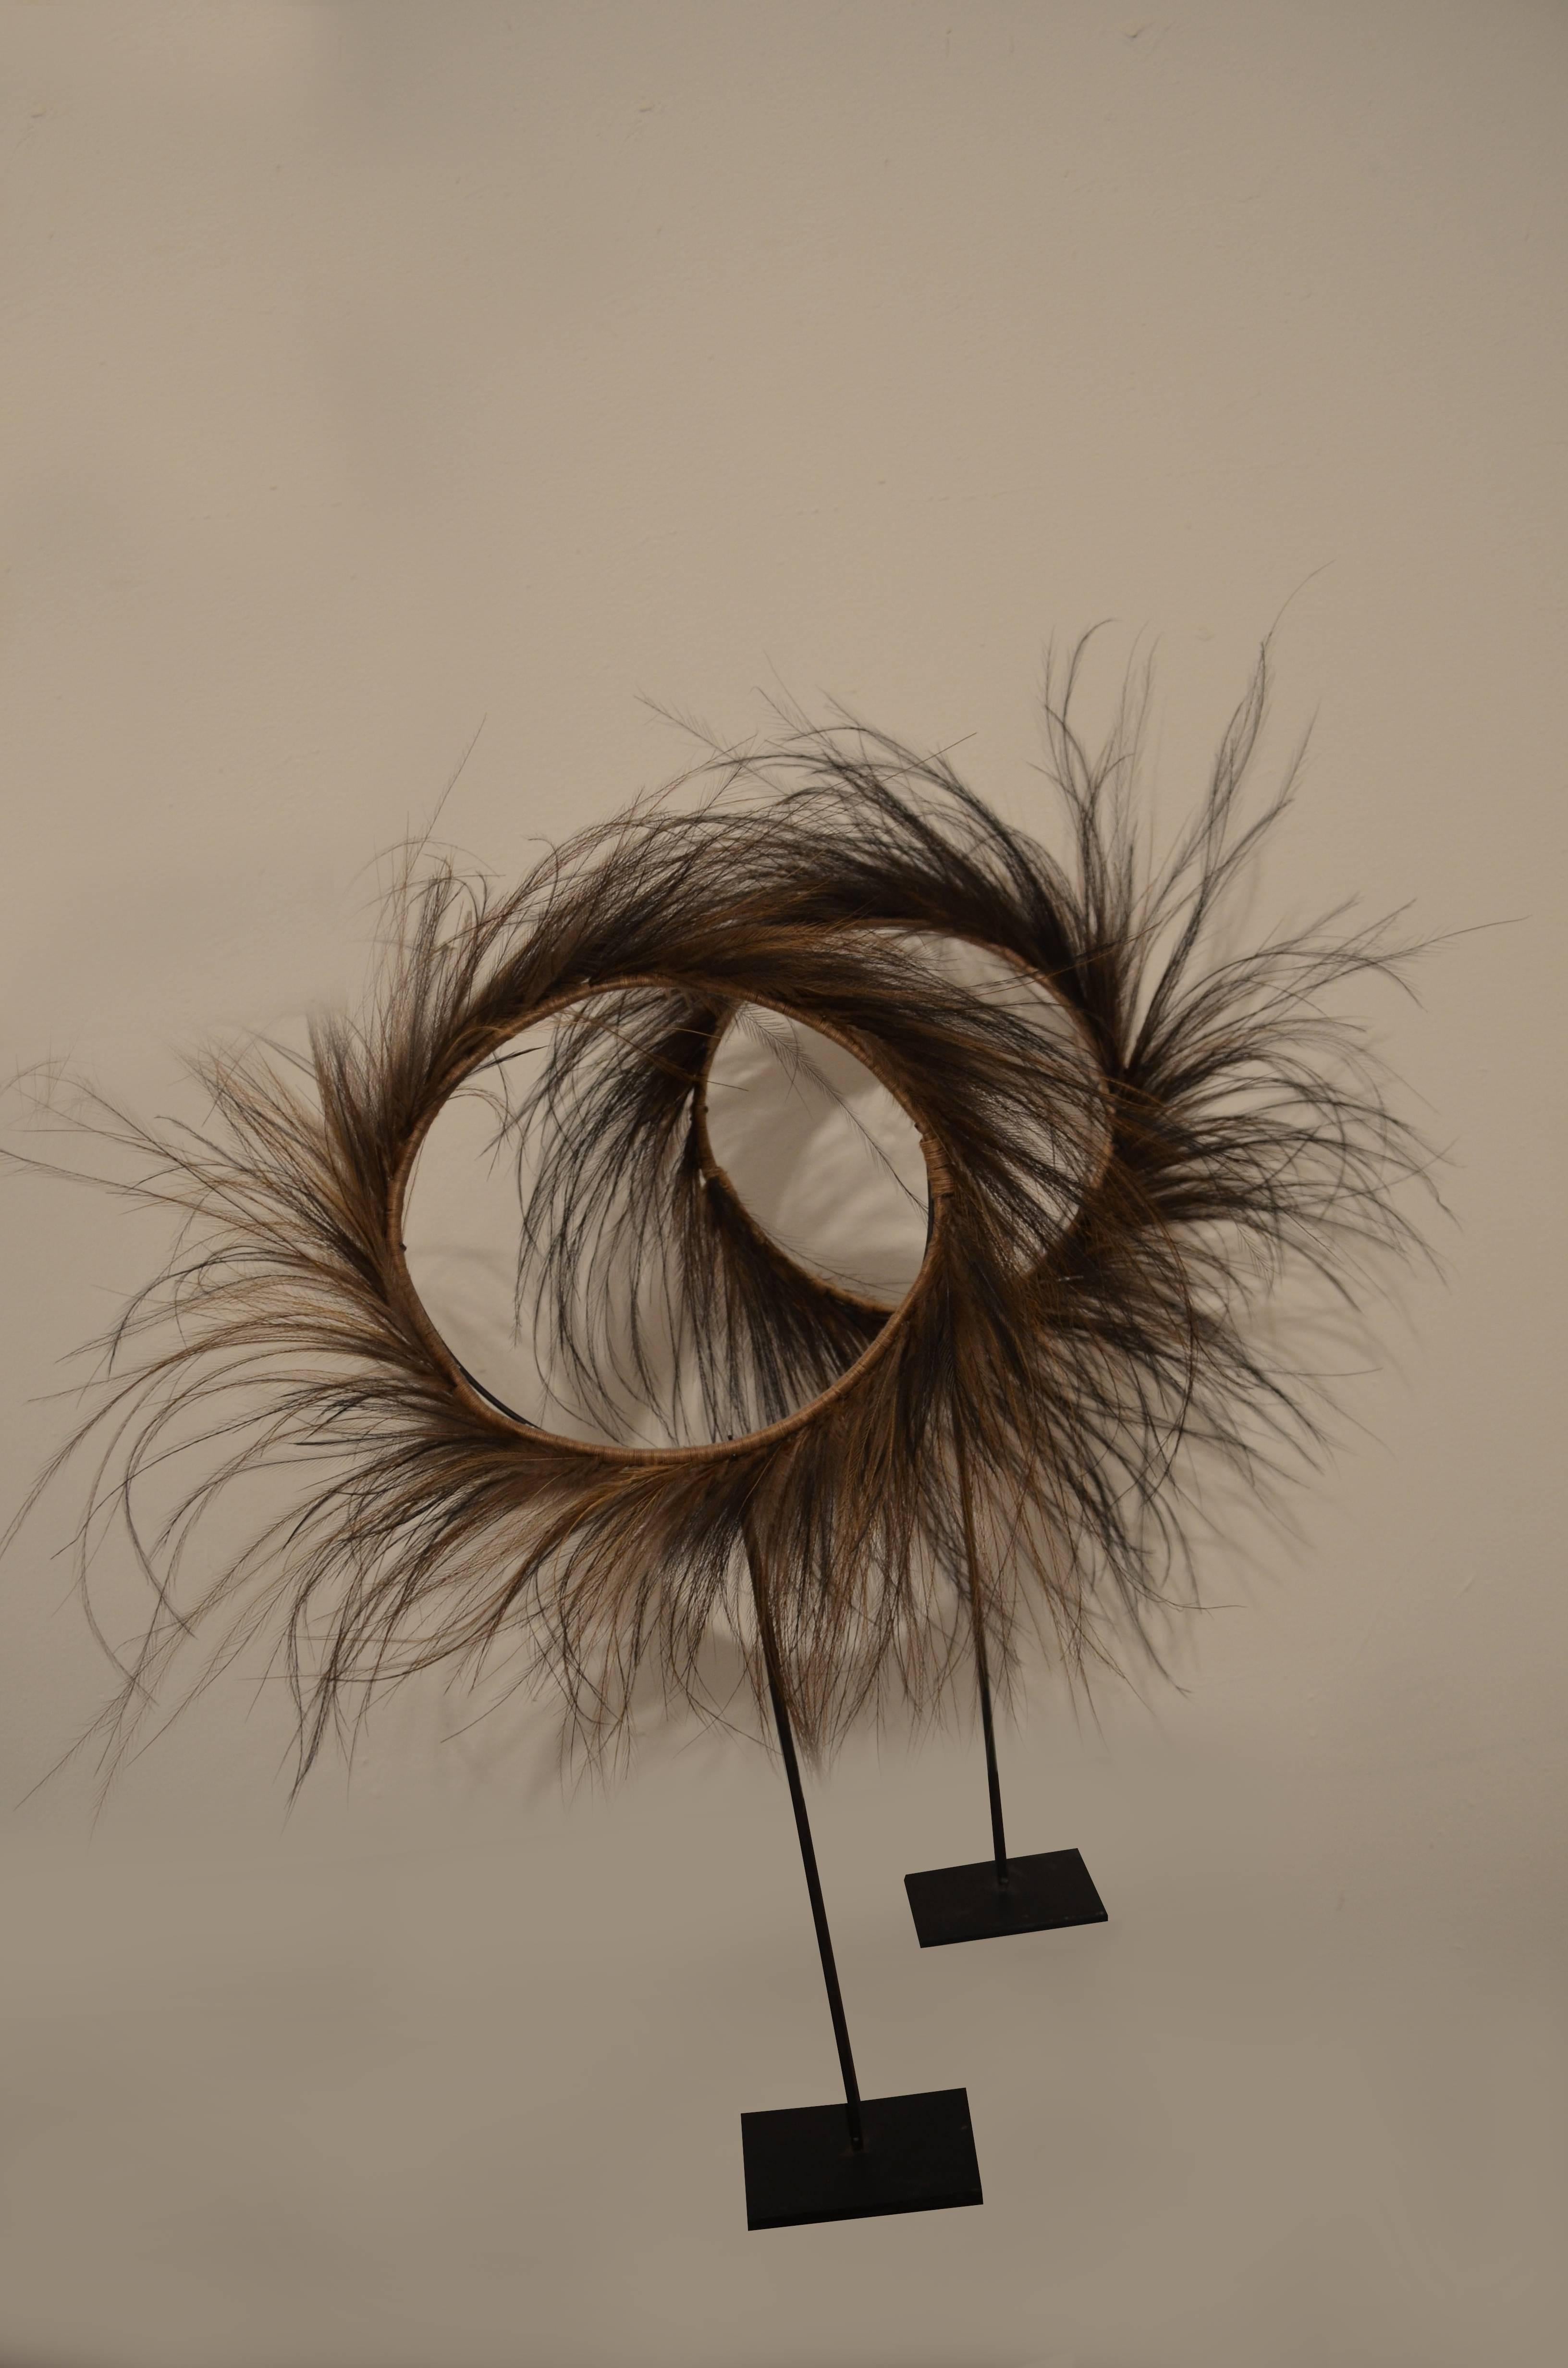 Tribal headwear from Papua. Marabou feathers. Set on a modern stand. Large collection available. Please inquire.
Andrianna Shamaris, Inc. The Leader In Modern Organic Design™